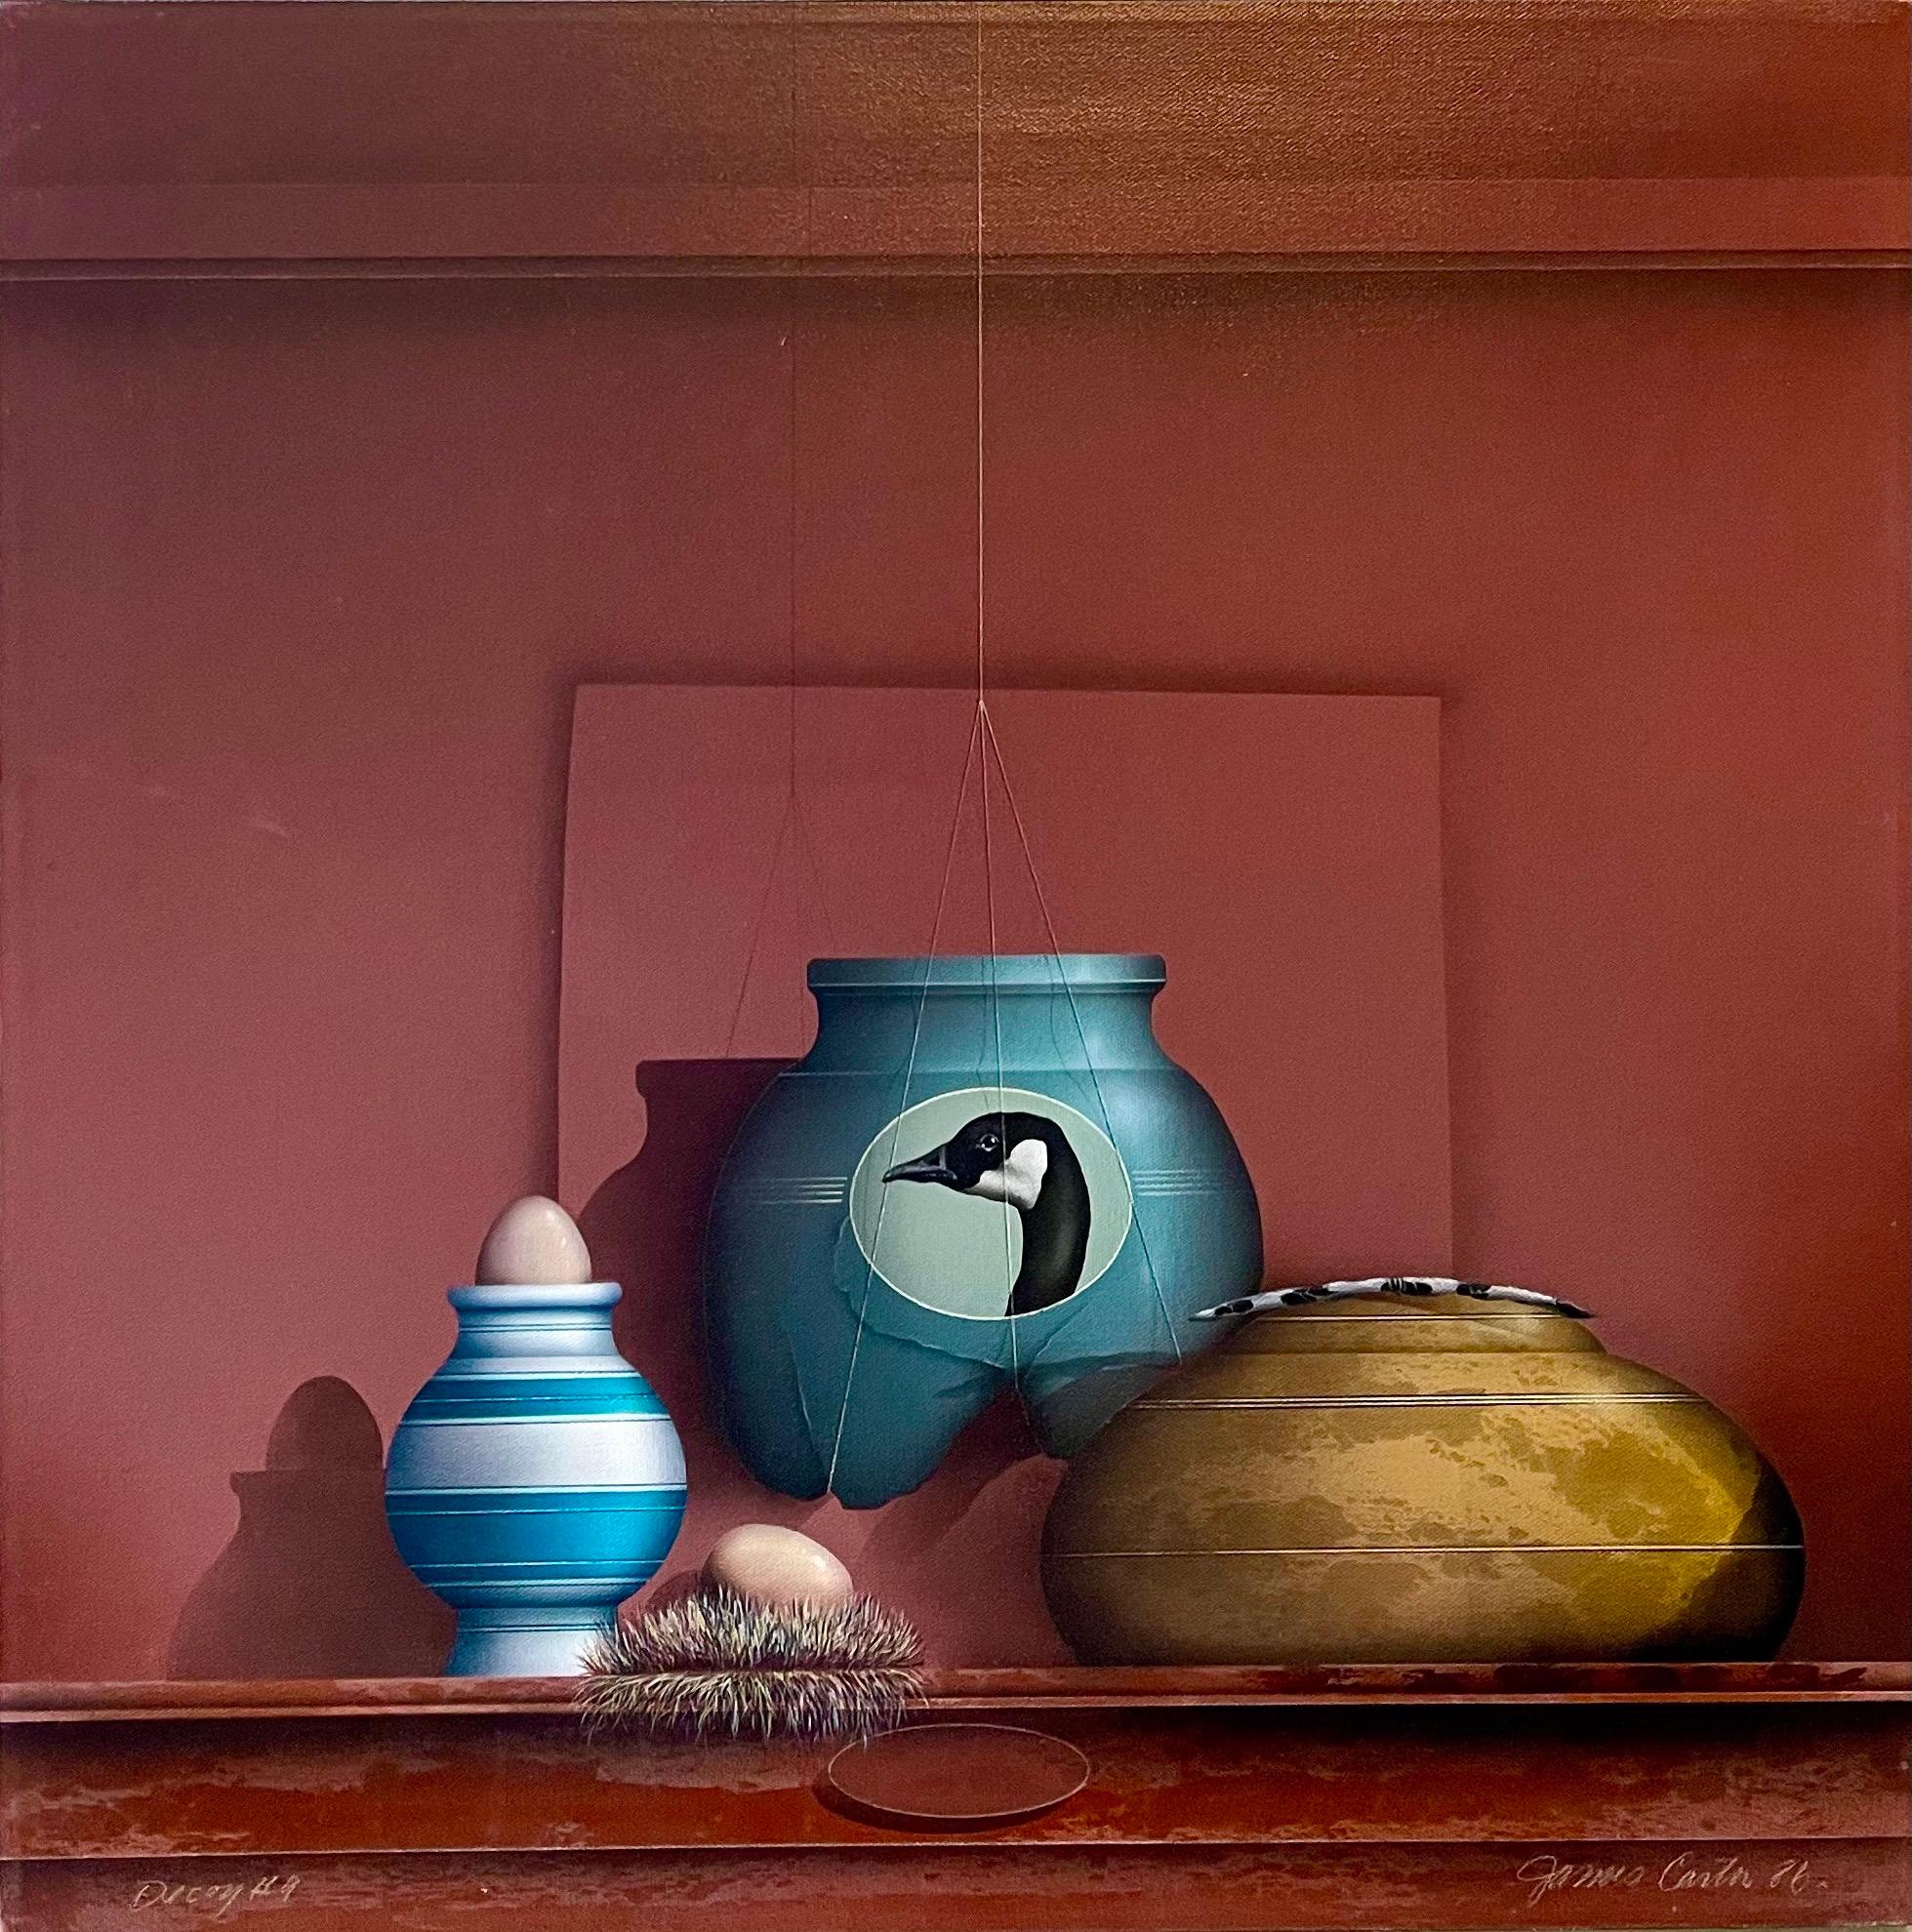 Provenance: Madison Gallery (Madison Connecticut) bears their label verso.
Hunting and fishing cabin themed artwork in a hyper realist or photo realist style.

James Carter (Born 1948) is active/lives in Connecticut.  James O Carter is known for